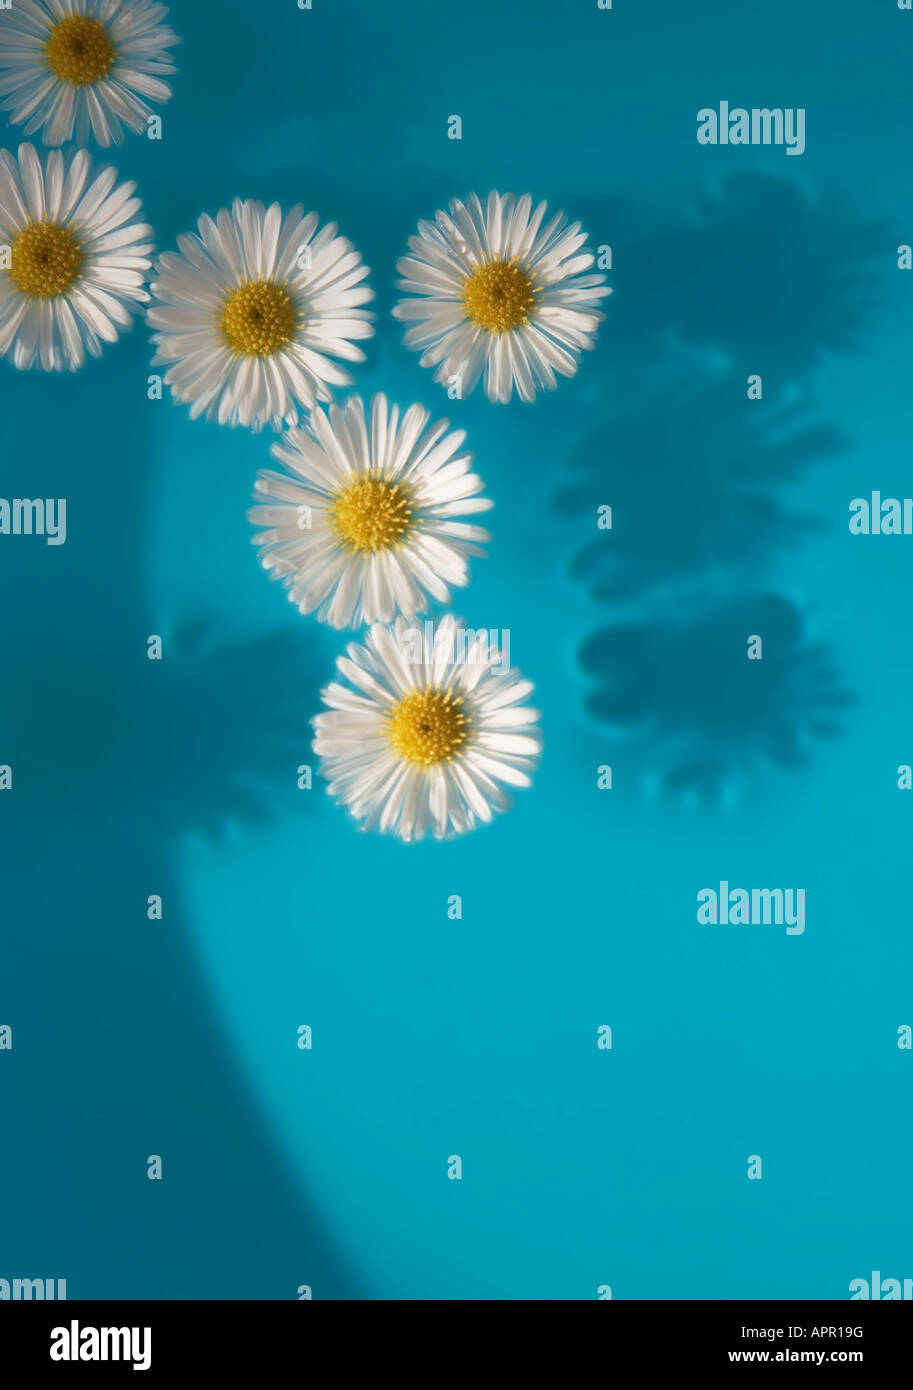 Daisy flowers floating in blue water Stock Photo